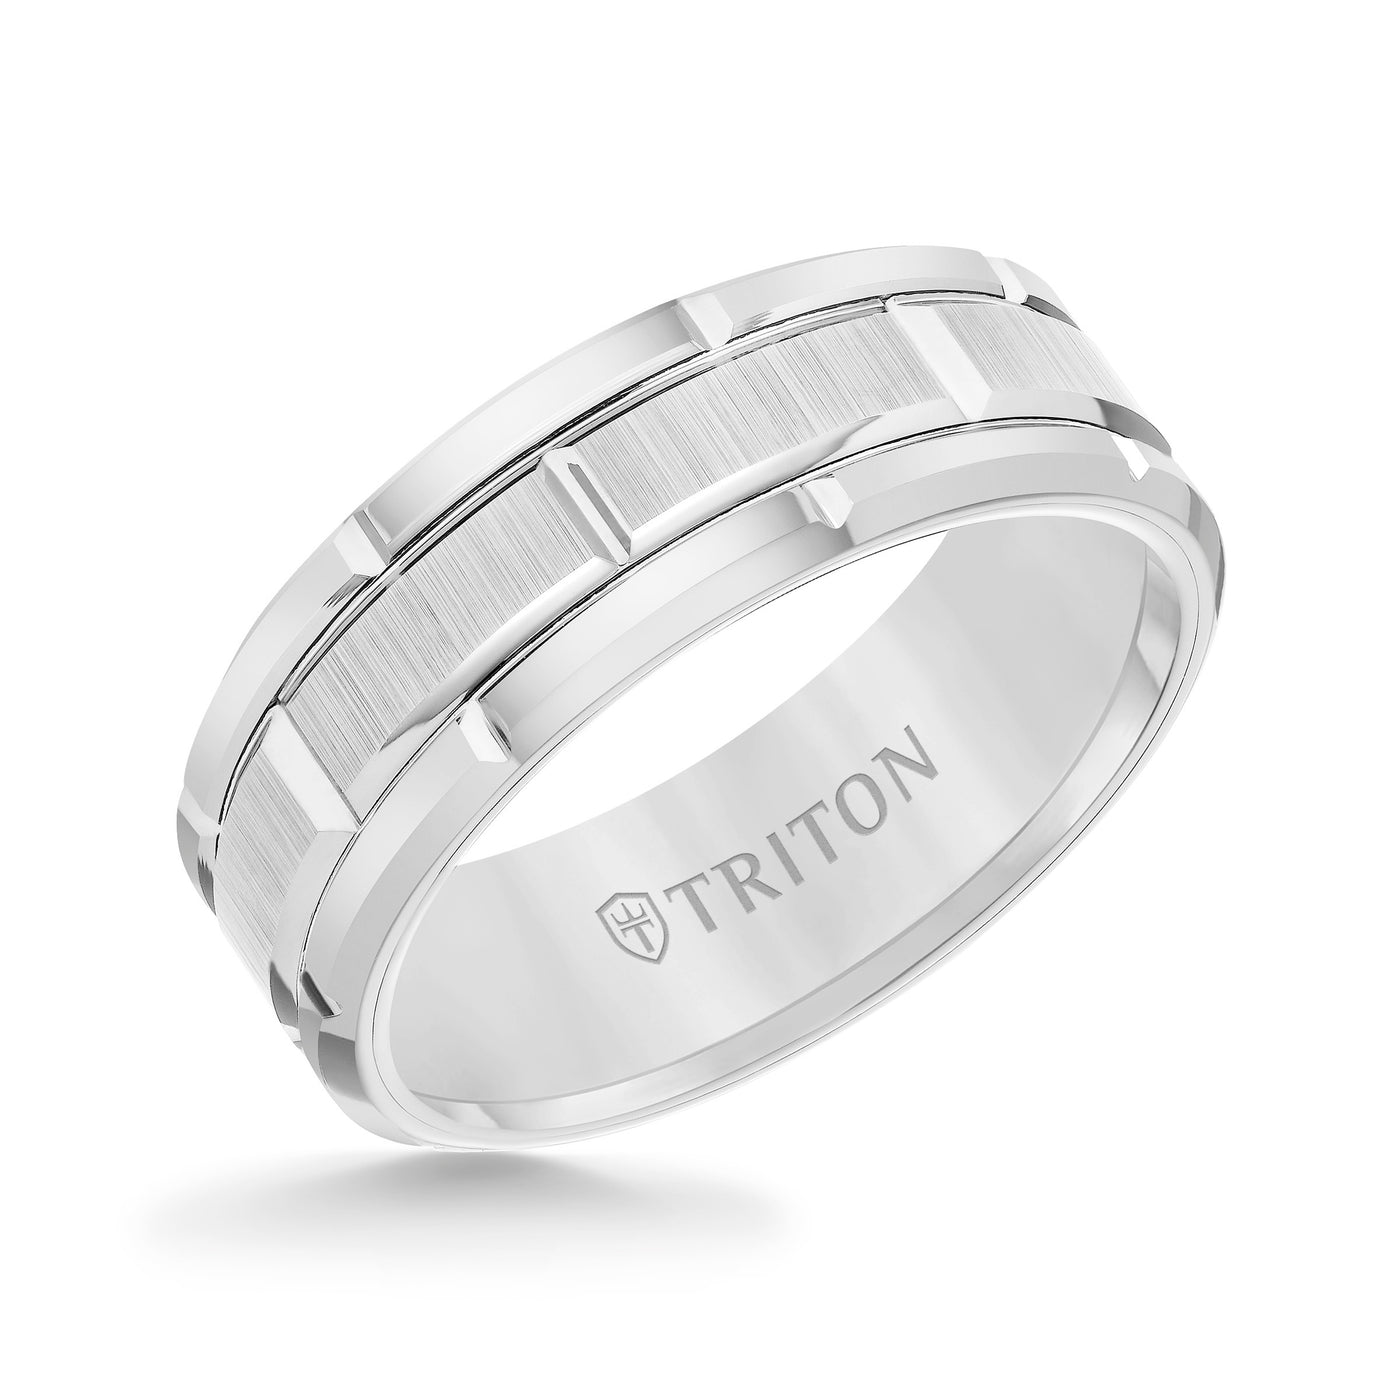 8mm White Tungsten Carbide Bevel Edge Comfort Fit Band with Vertical Satin Finish Center and Bright Edges and Cuts